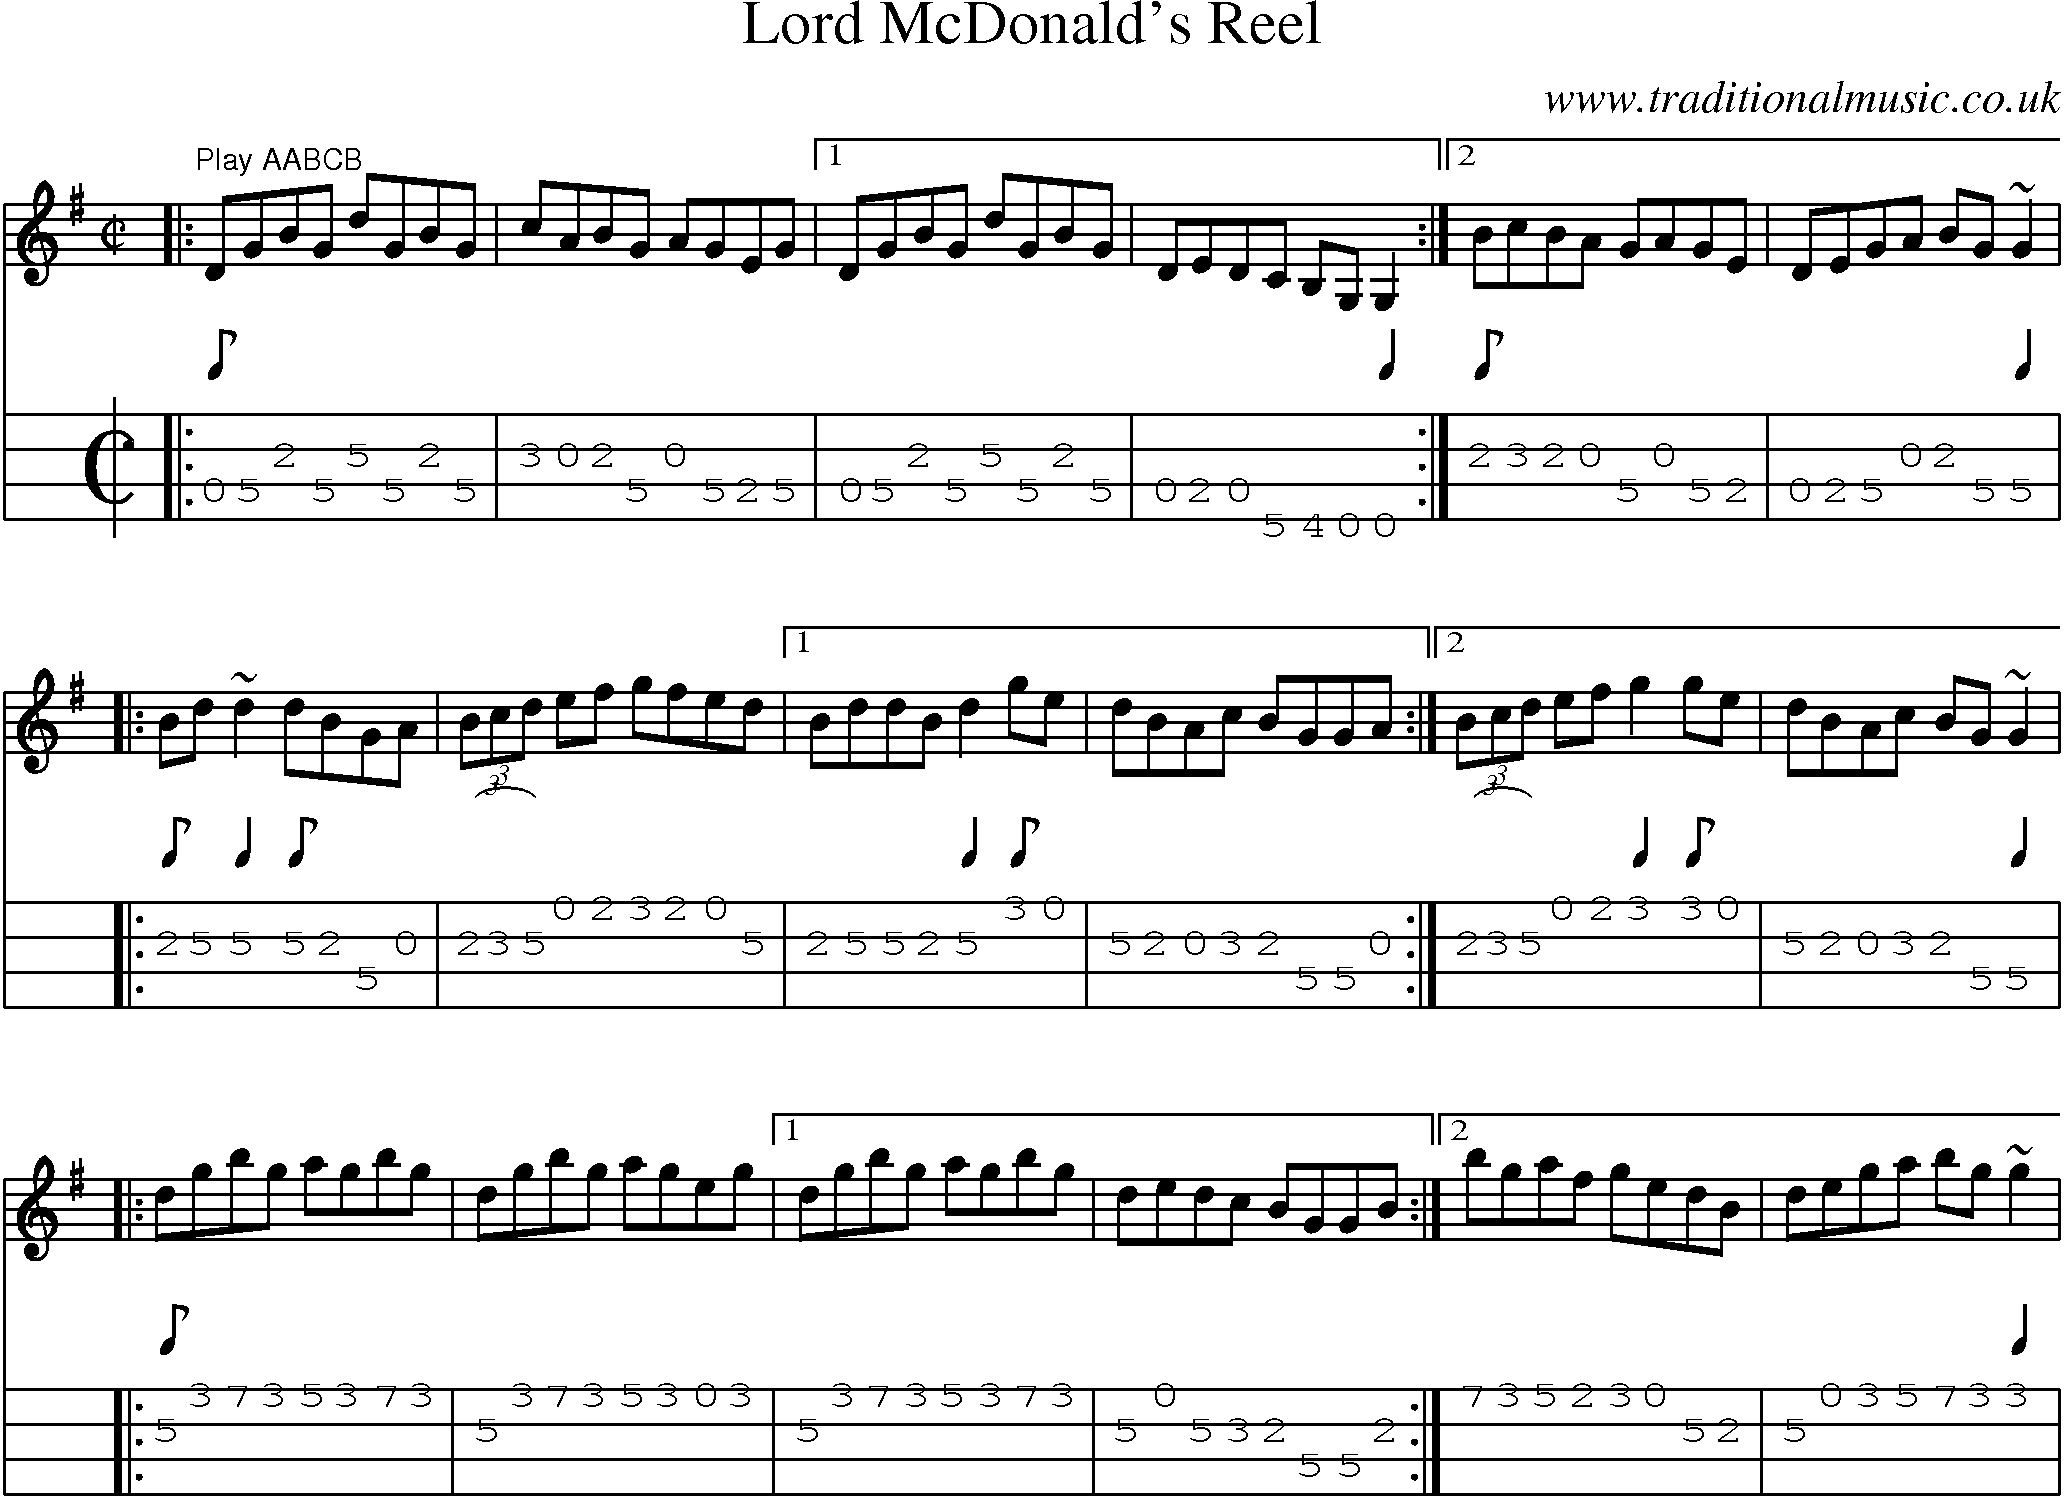 Music Score and Mandolin Tabs for Lord Mcdonalds Reel